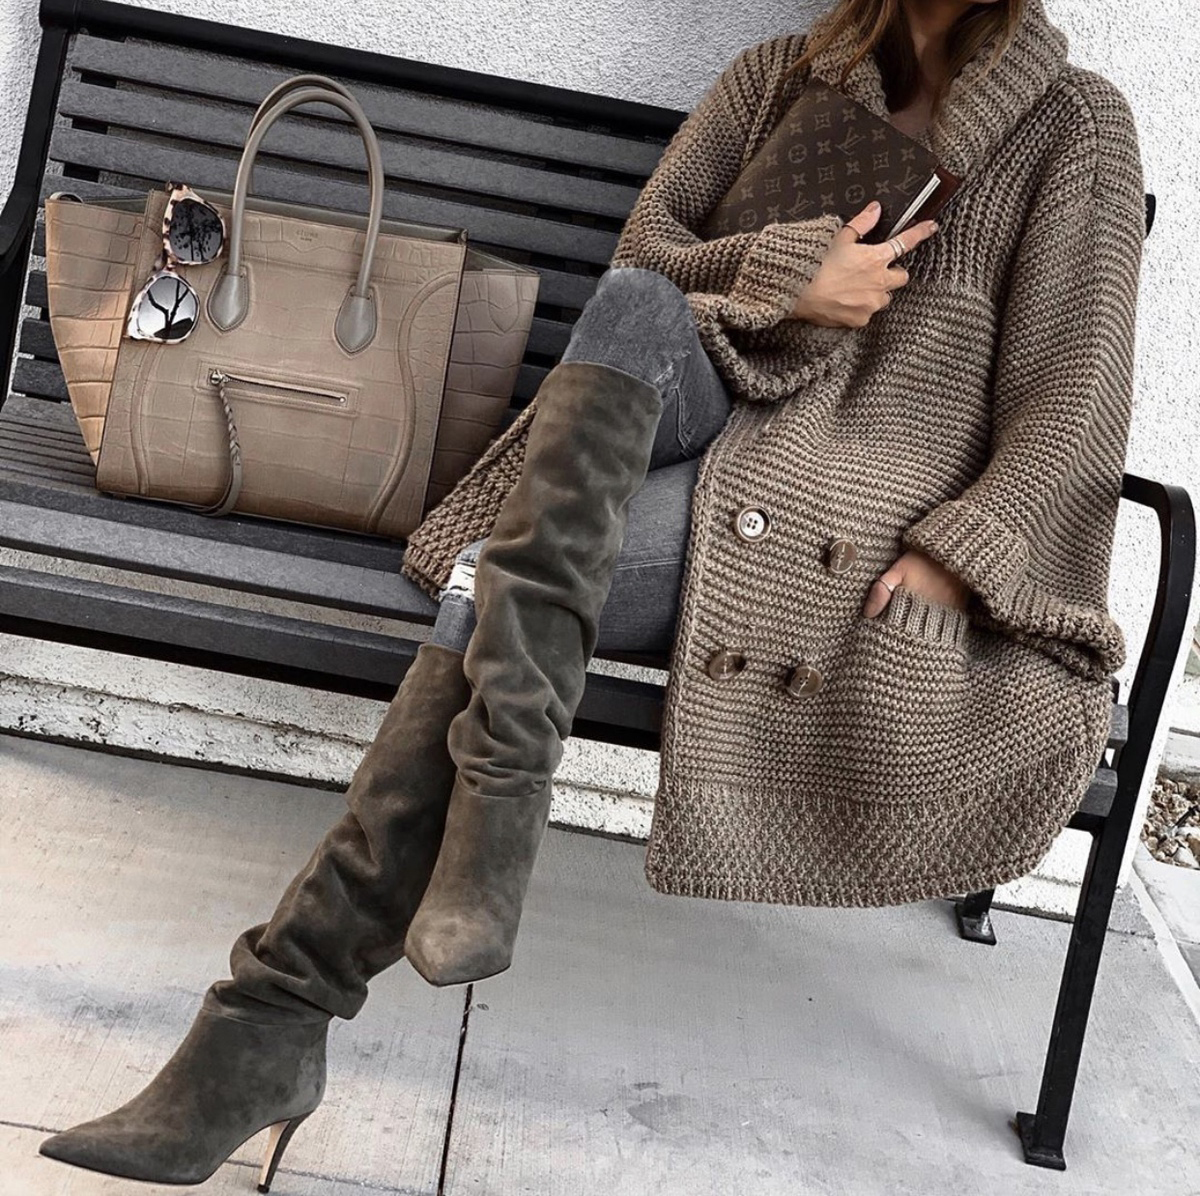 sweater styles, chic sweater styles, sweater styles of fall 2019, knit poncho and slouchy boots | lolario style